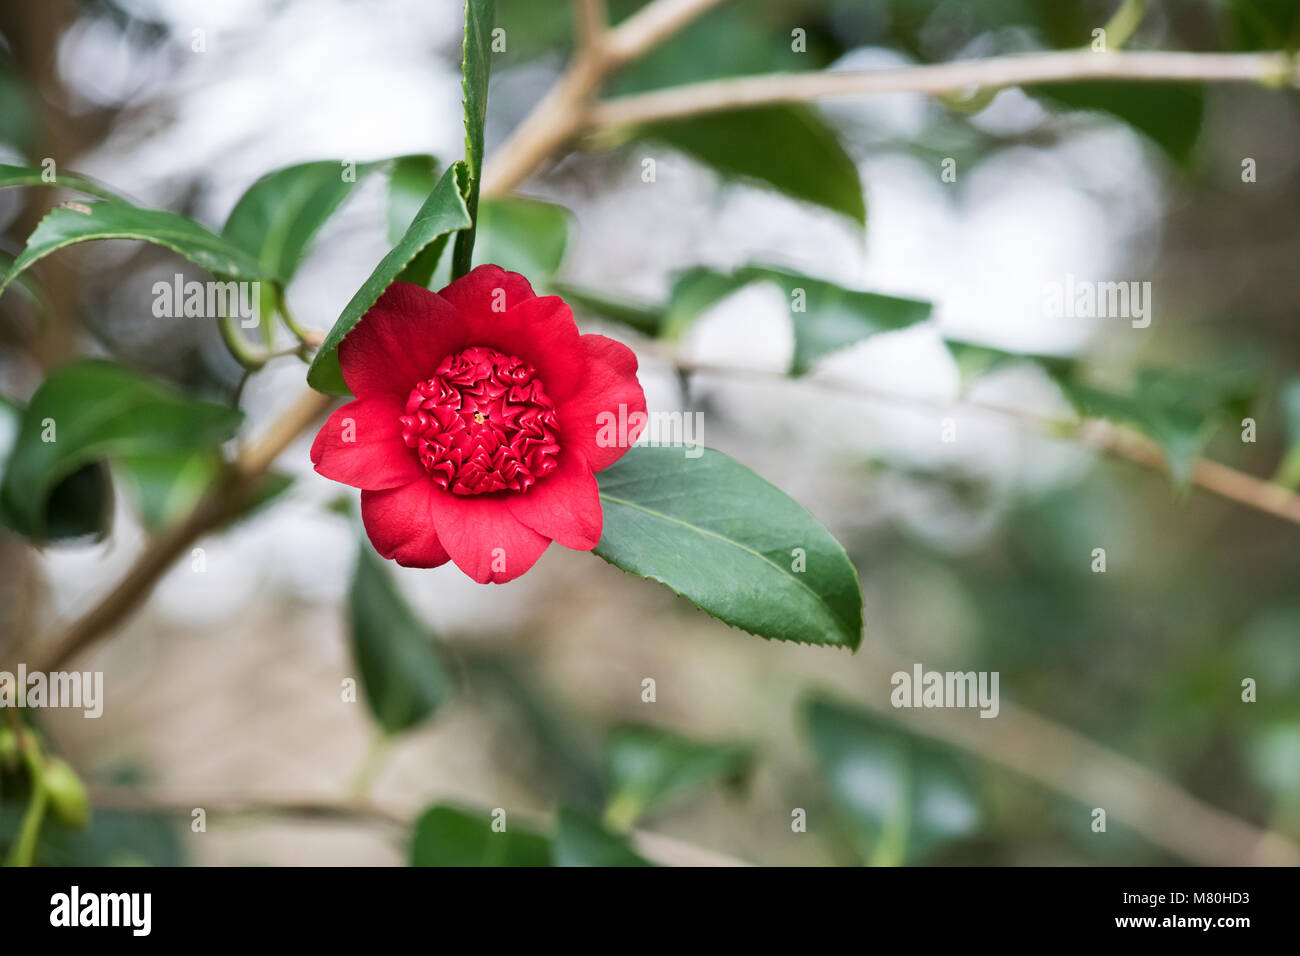 Camellia japonica ‘Bob's tinsie’ flower in march. Bright red, anemone-form double flowers. UK Stock Photo